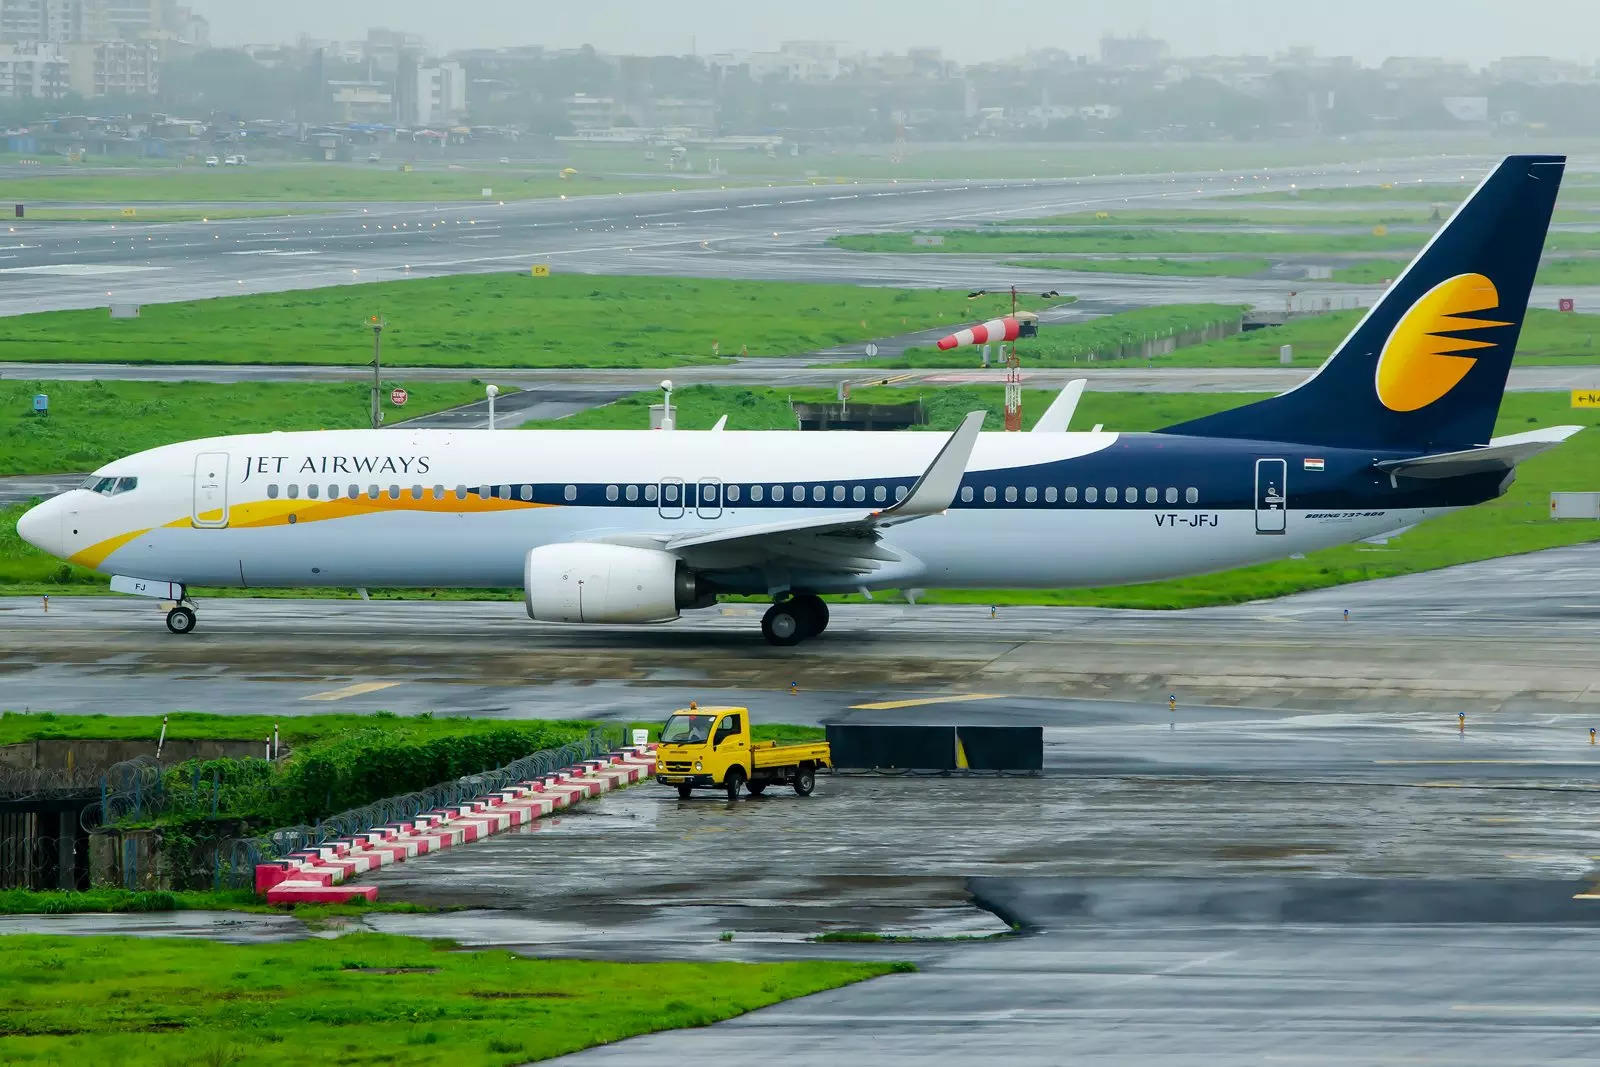 Jet Airways 2.0 first flight likely in October 2022, says CEO Sanjiv Kapoor